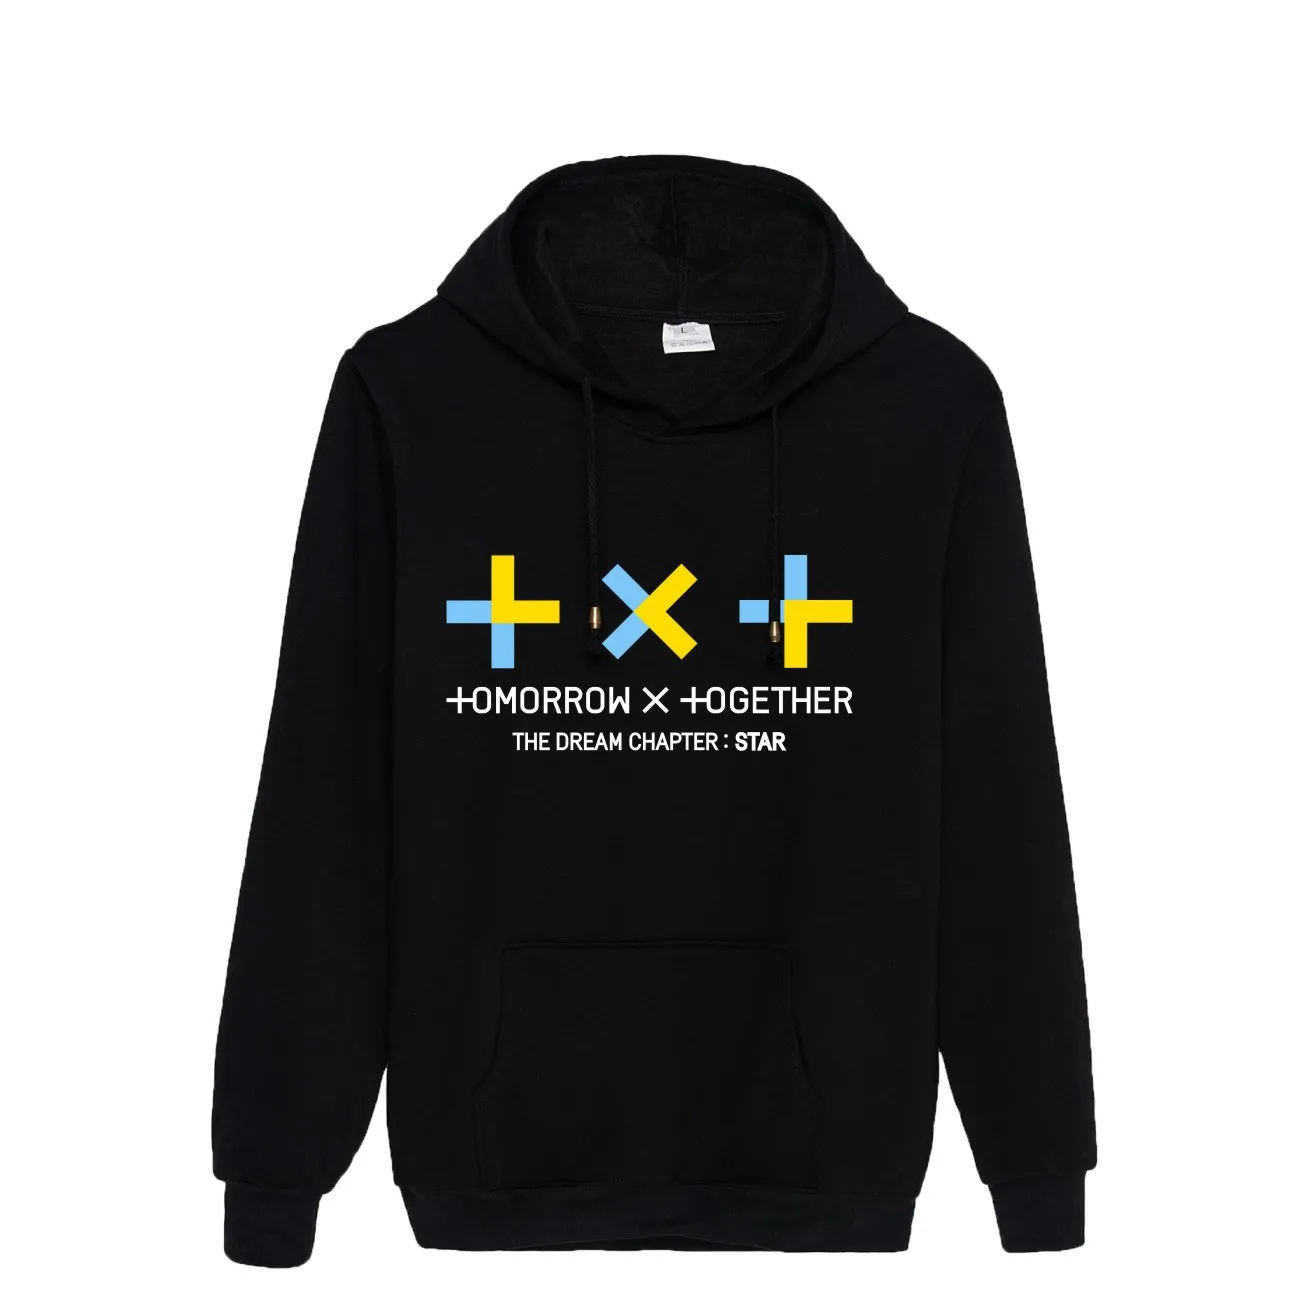 

New arrival Txt concert The Dream Chapter Star Album Hoodies kpop Harajuku TOMORROW X TOGETHER Hooded Sweatshirt pullover